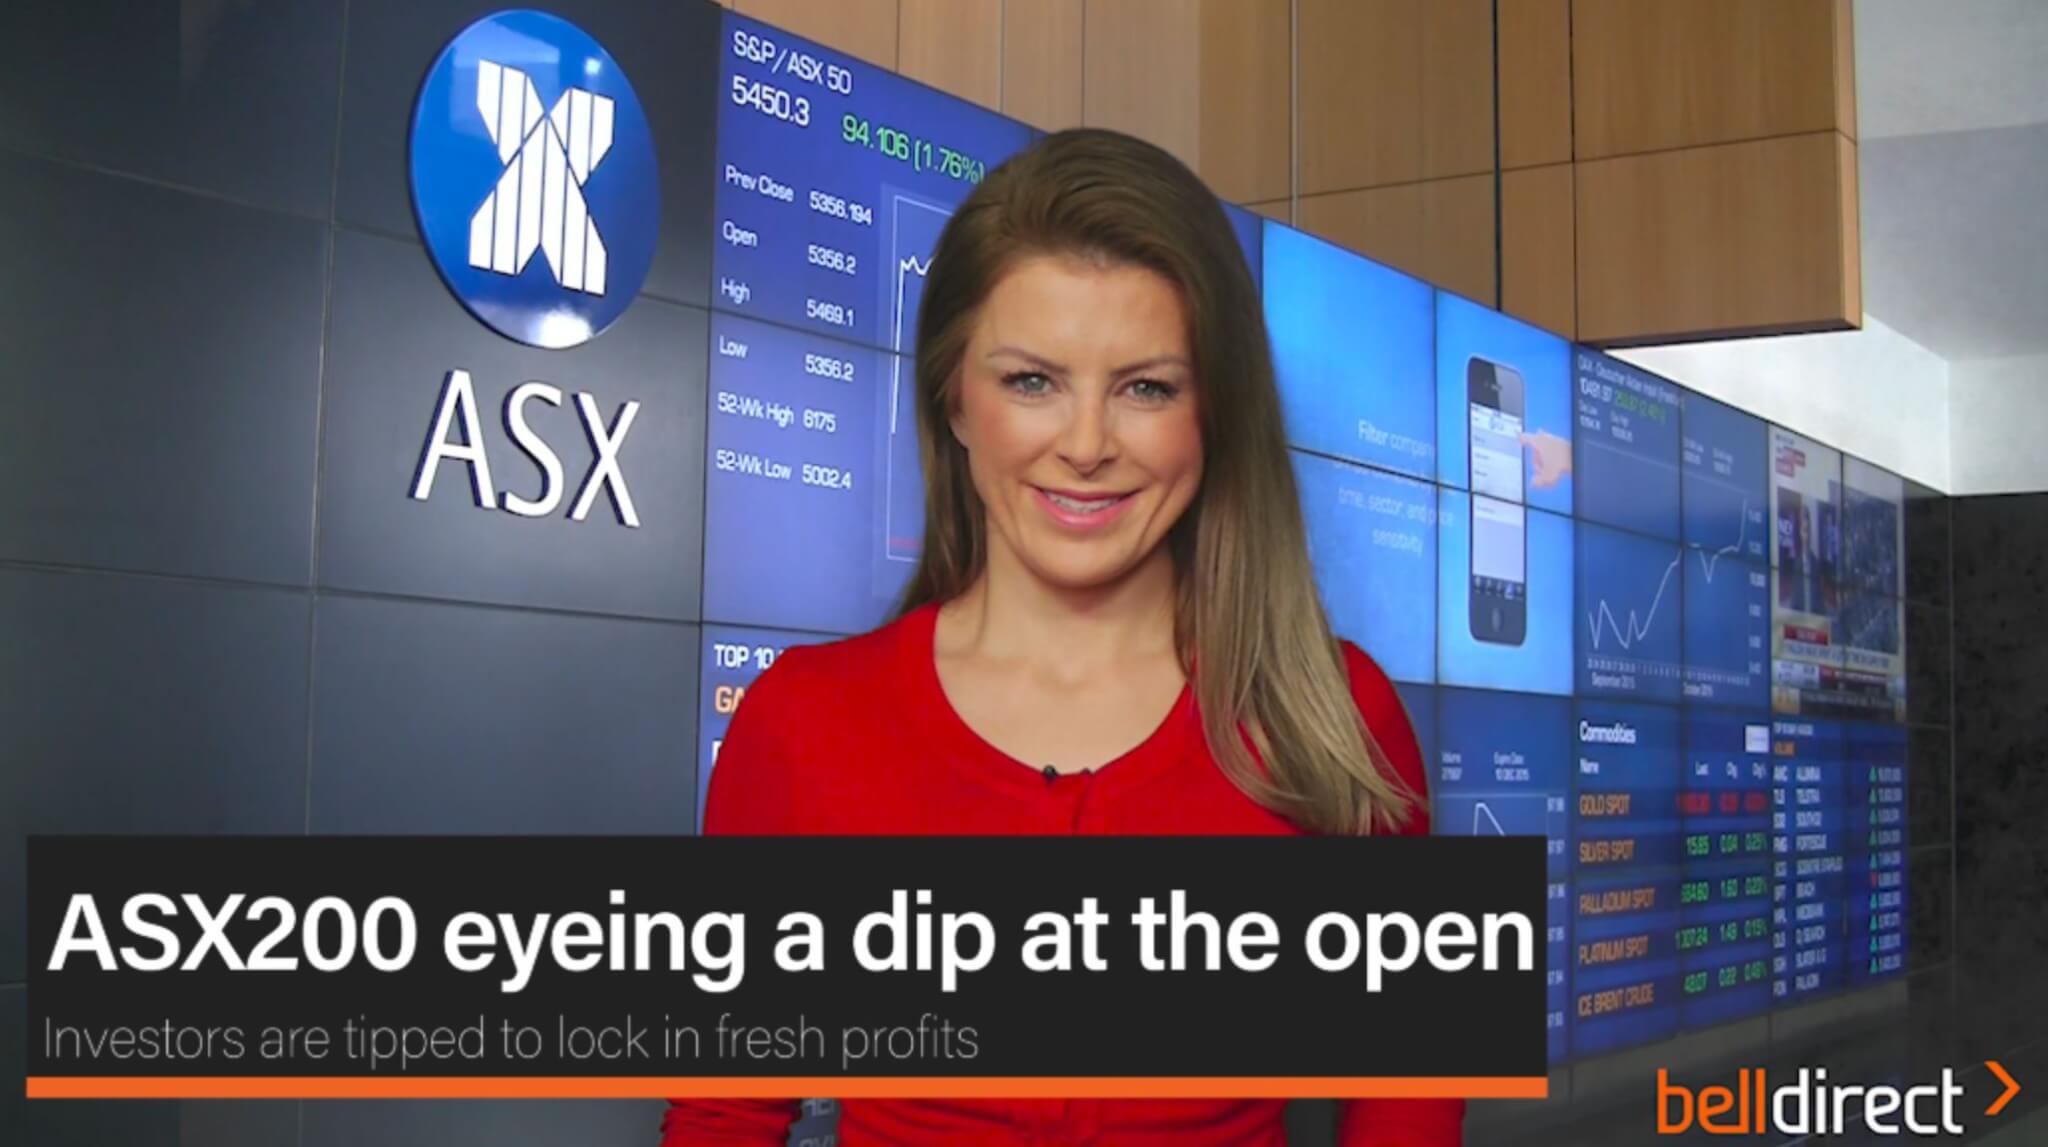 ASX200 eyeing a dip at the open